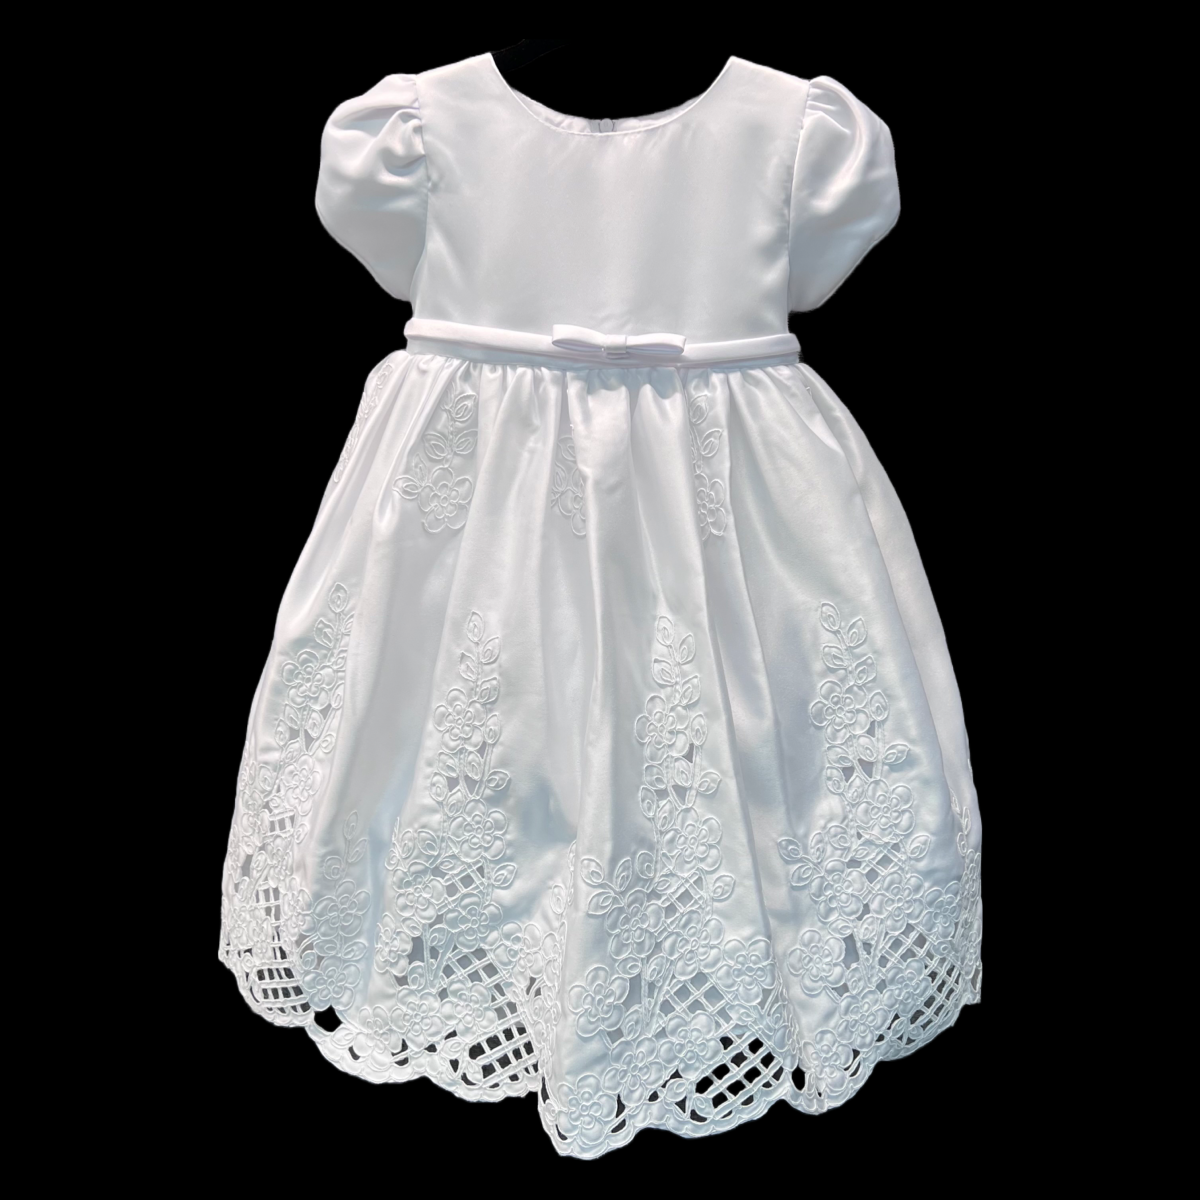 Floral Embroidered Satin Dress Christening Gown